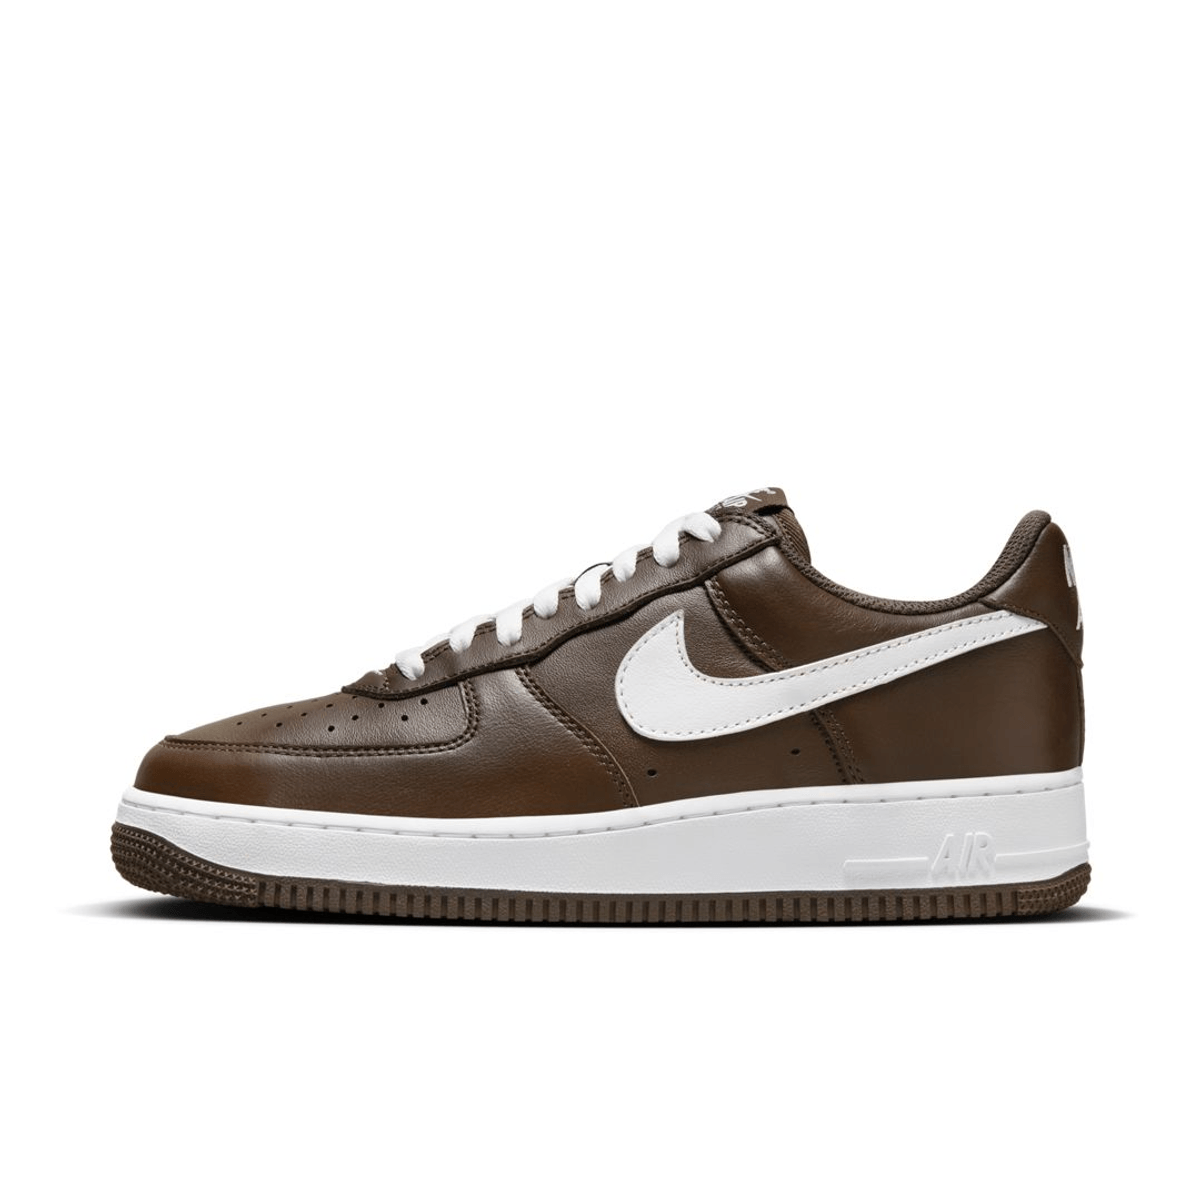 The Nike Air Force 1 Low “Chocolate” Arrives November 16th